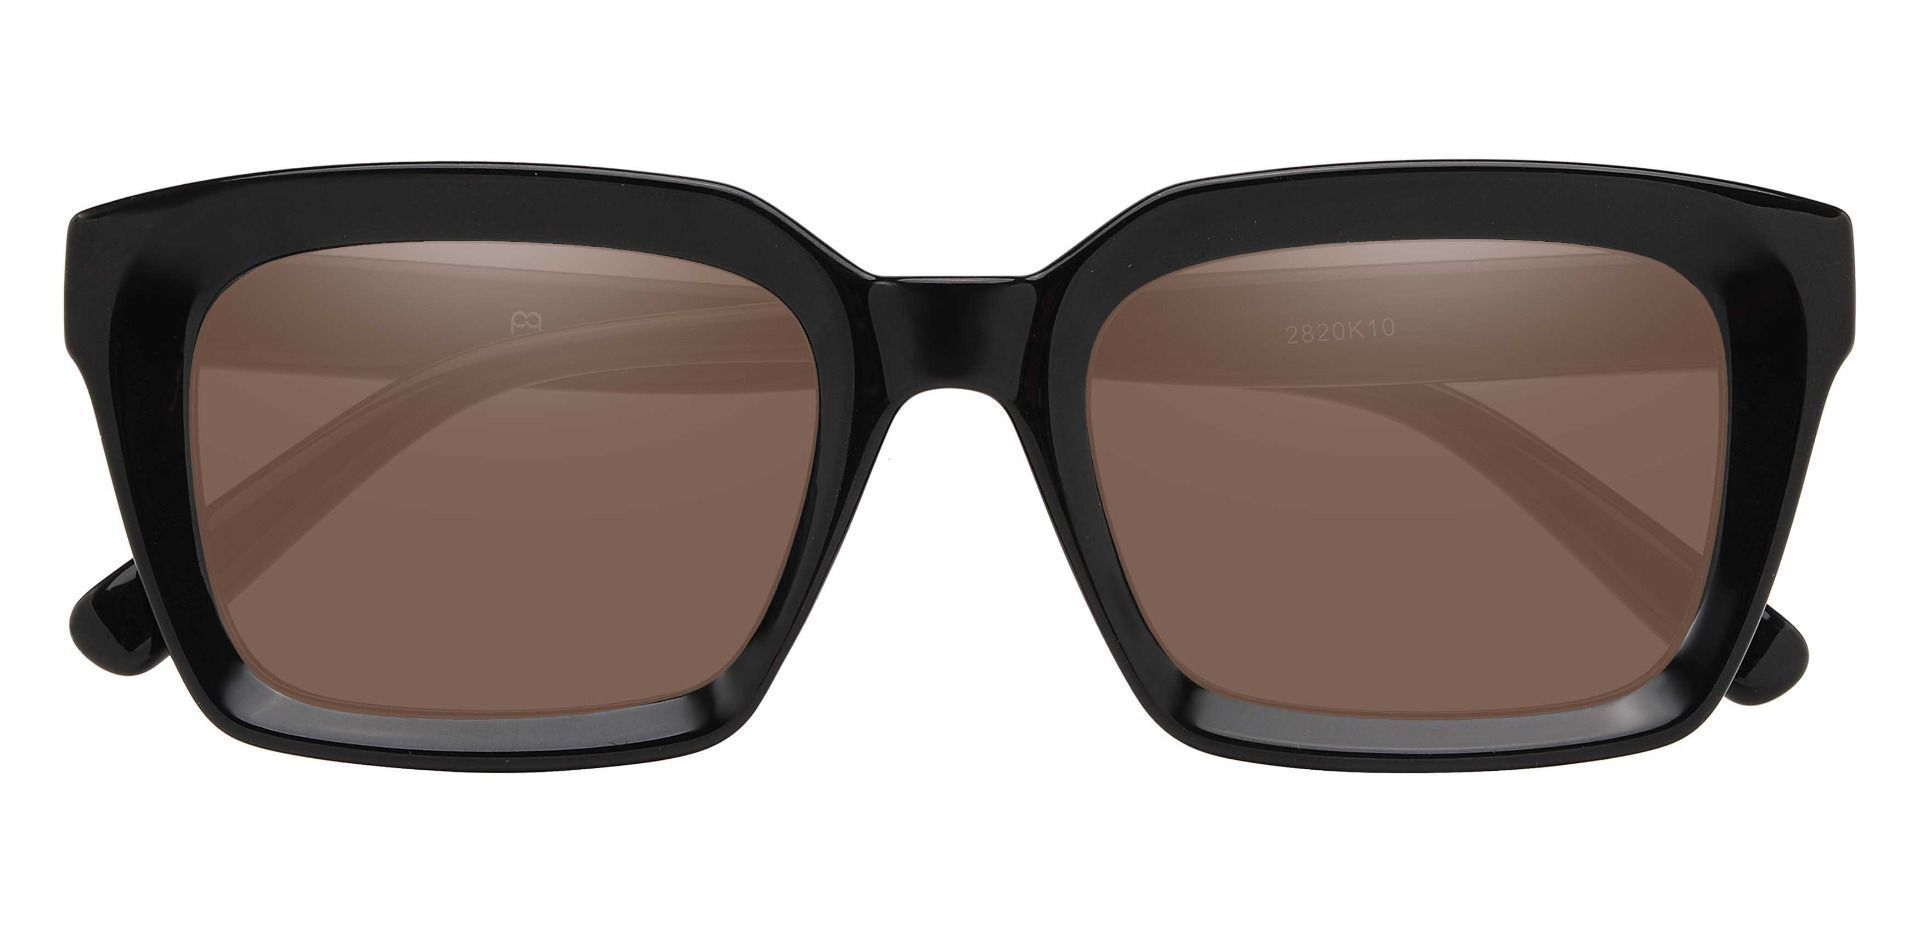 Unity Rectangle Non-Rx Sunglasses - Black Frame With Brown Lenses